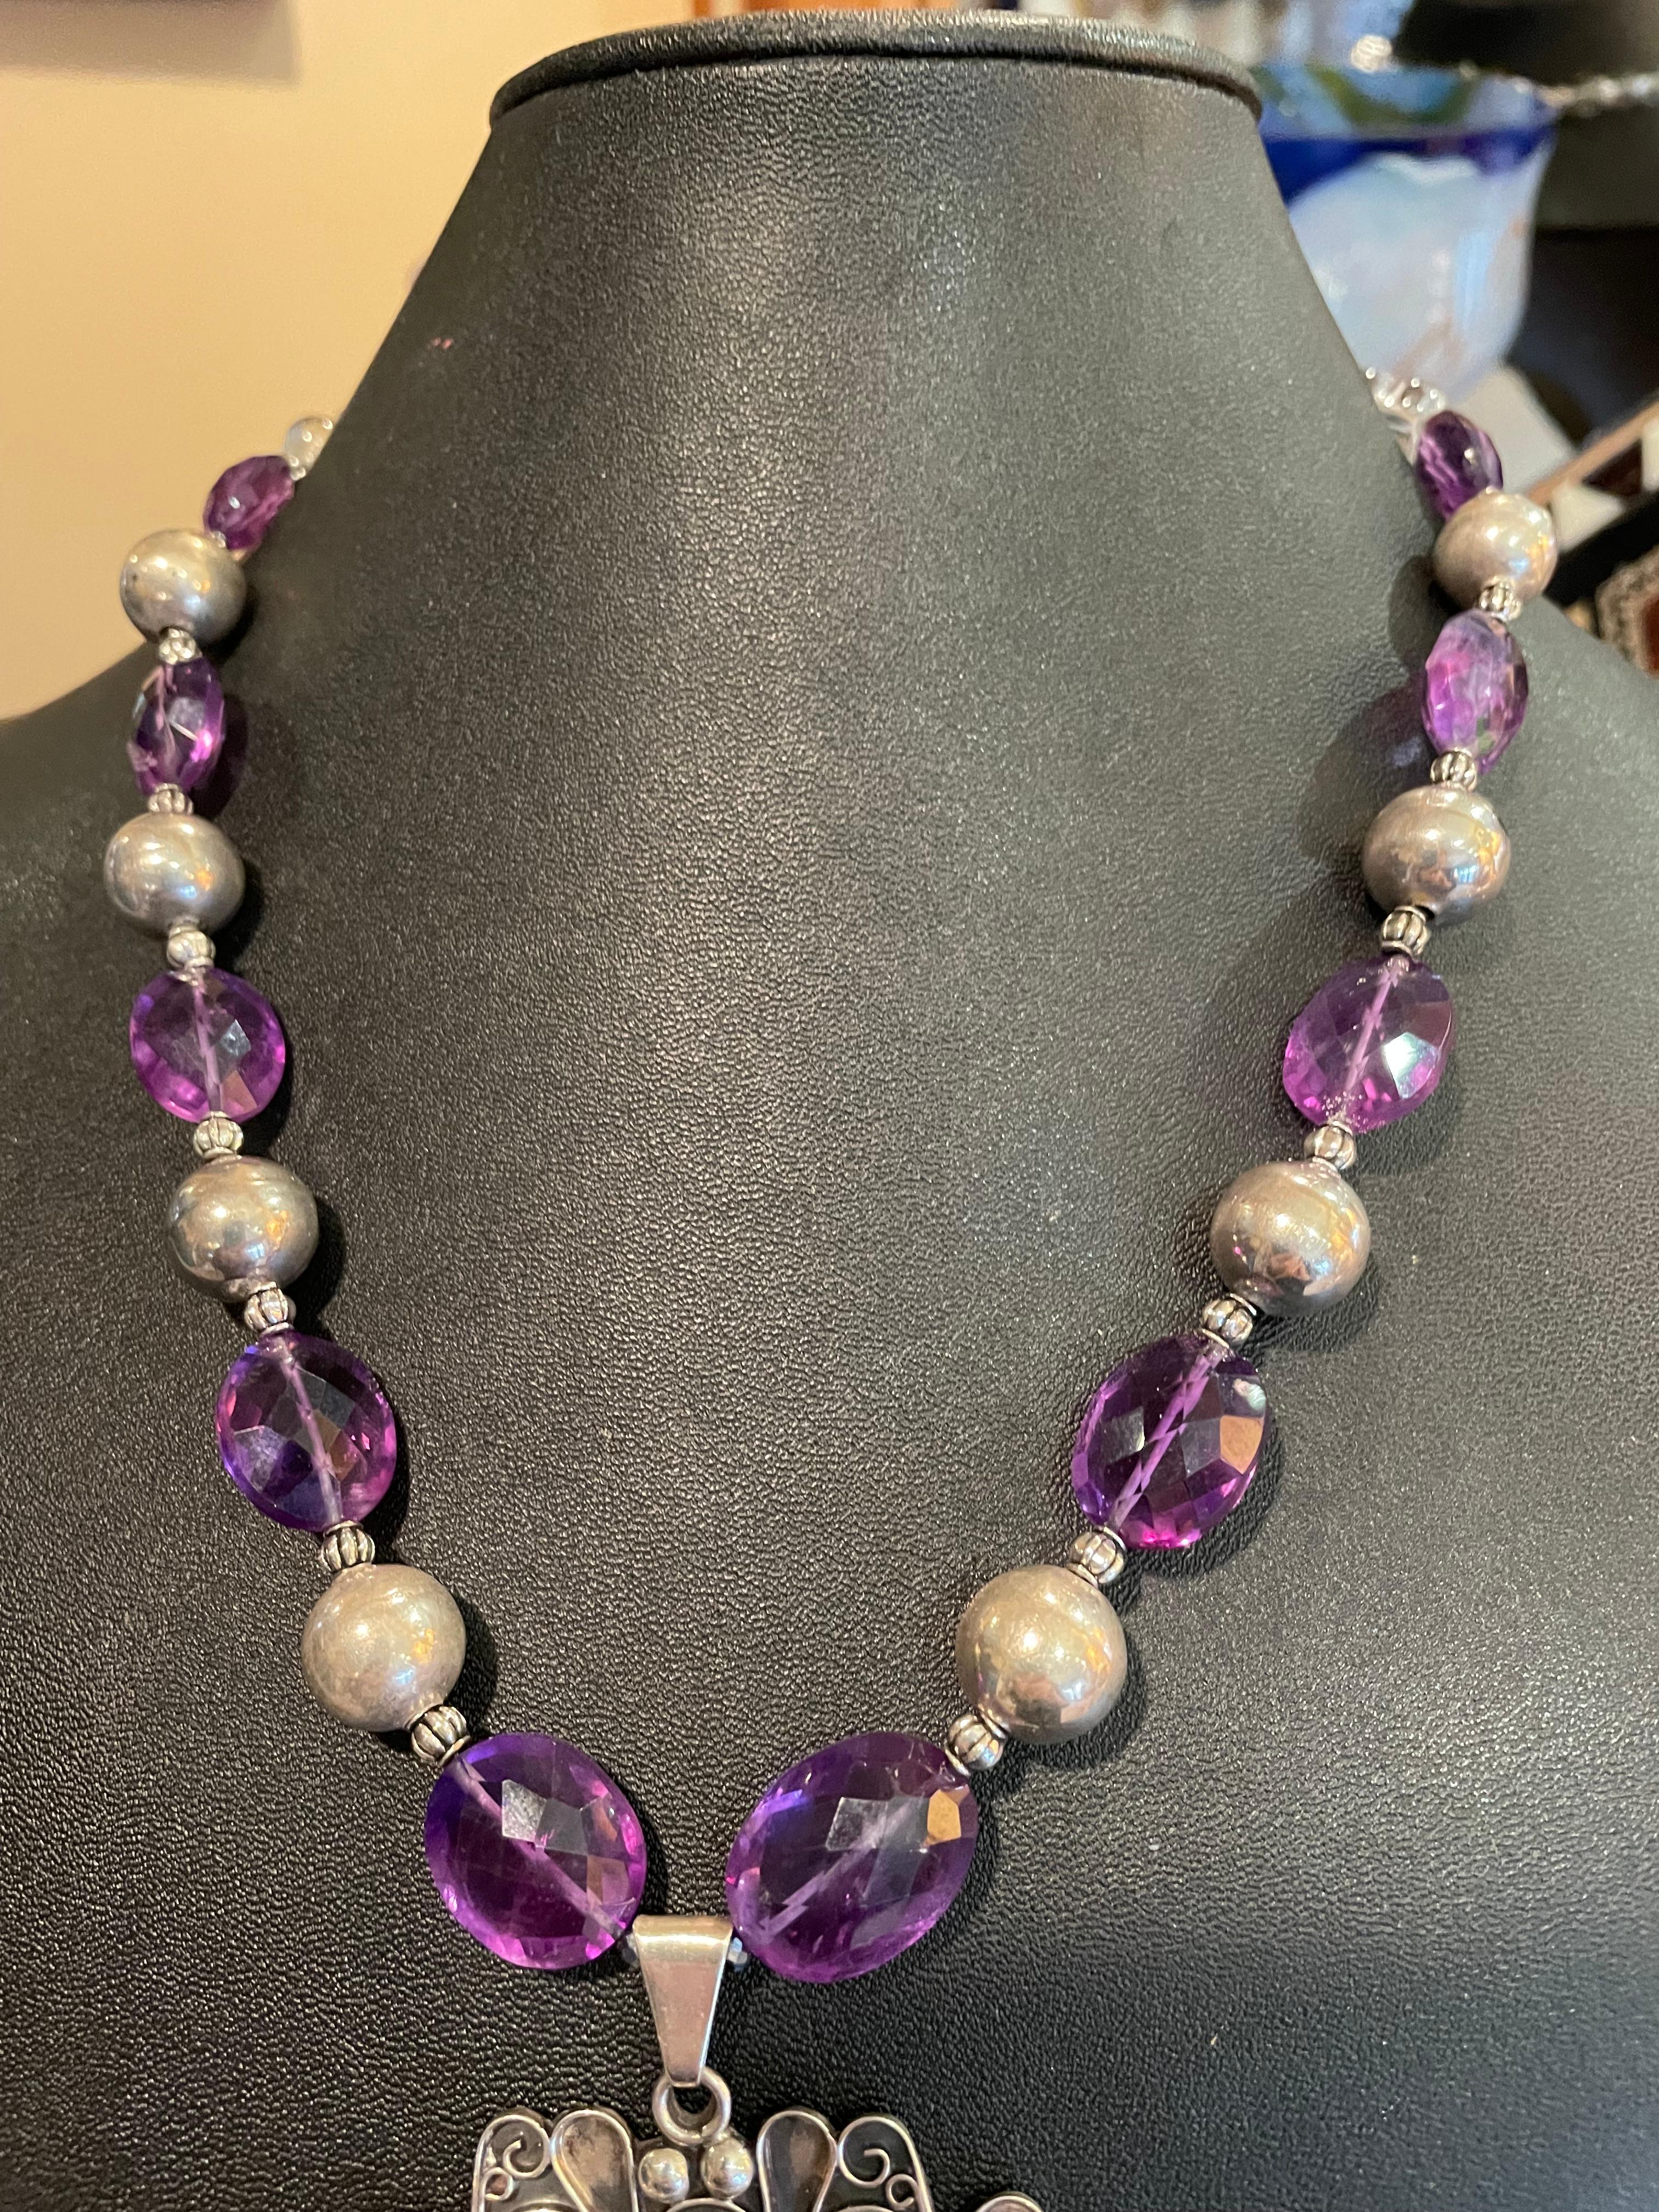 Artisan LB offers Vintage Mexican Sterling/Amethyst Aztec Pendant Sterling bead necklace For Sale